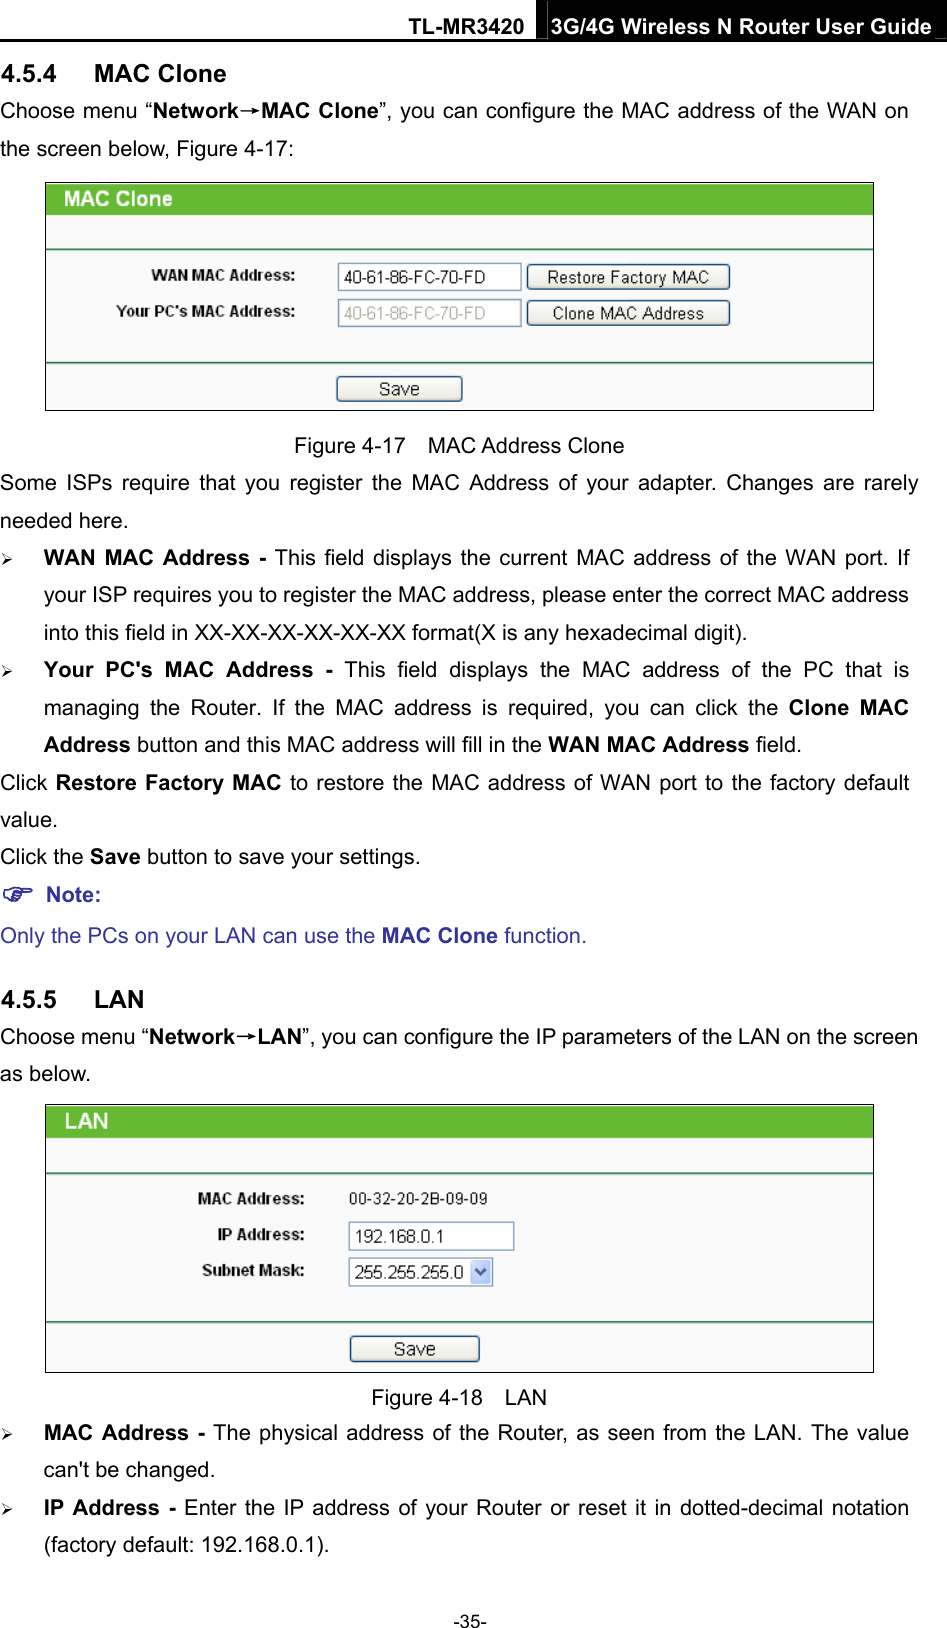 TL-MR3420 3G/4G Wireless N Router User Guide 4.5.4  MAC Clone Choose menu “Network→MAC Clone”, you can configure the MAC address of the WAN on the screen below, Figure 4-17:  Figure 4-17  MAC Address Clone Some ISPs require that you register the MAC Address of your adapter. Changes are rarely needed here.  WAN MAC Address - This field displays the current MAC address of the WAN port. If your ISP requires you to register the MAC address, please enter the correct MAC address into this field in XX-XX-XX-XX-XX-XX format(X is any hexadecimal digit).    Your PC&apos;s MAC Address - This field displays the MAC address of the PC that is managing the Router. If the MAC address is required, you can click the Clone MAC Address button and this MAC address will fill in the WAN MAC Address field. Click Restore Factory MAC to restore the MAC address of WAN port to the factory default value. Click the Save button to save your settings.  Note:  Only the PCs on your LAN can use the MAC Clone function. 4.5.5  LAN Choose menu “Network→LAN”, you can configure the IP parameters of the LAN on the screen as below.  Figure 4-18  LAN  MAC Address - The physical address of the Router, as seen from the LAN. The value can&apos;t be changed.  IP Address - Enter the IP address of your Router or reset it in dotted-decimal notation (factory default: 192.168.0.1). -35- 